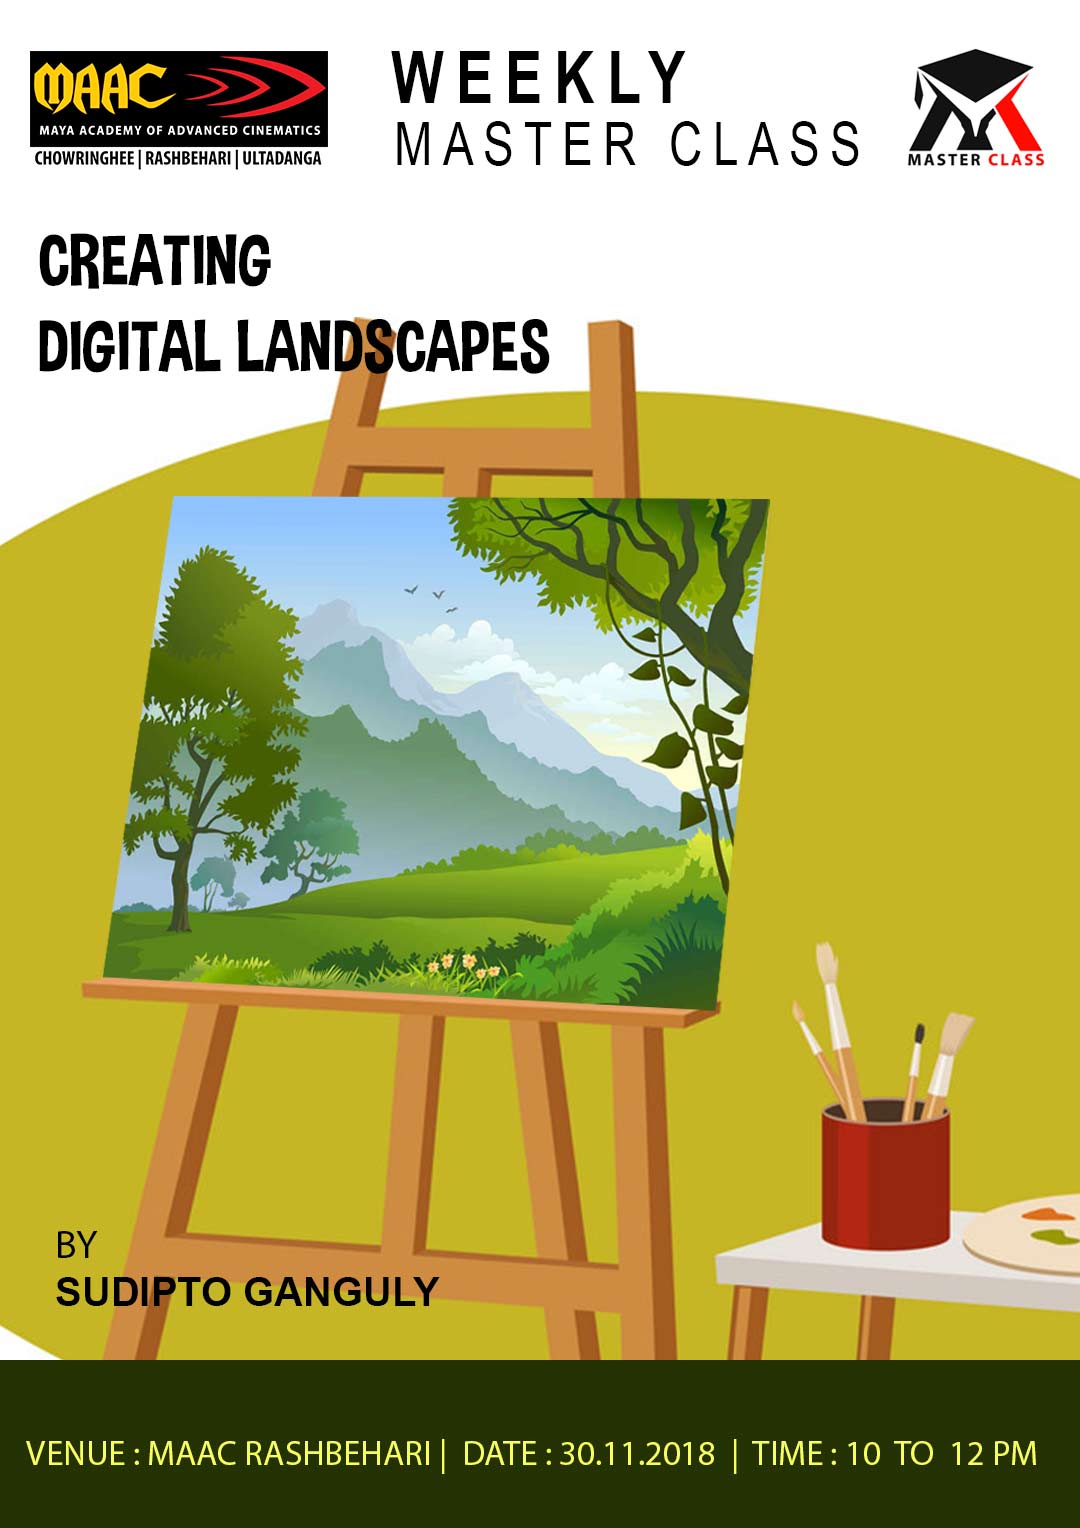 Weekly Master Class on Creating Digital Landscapes